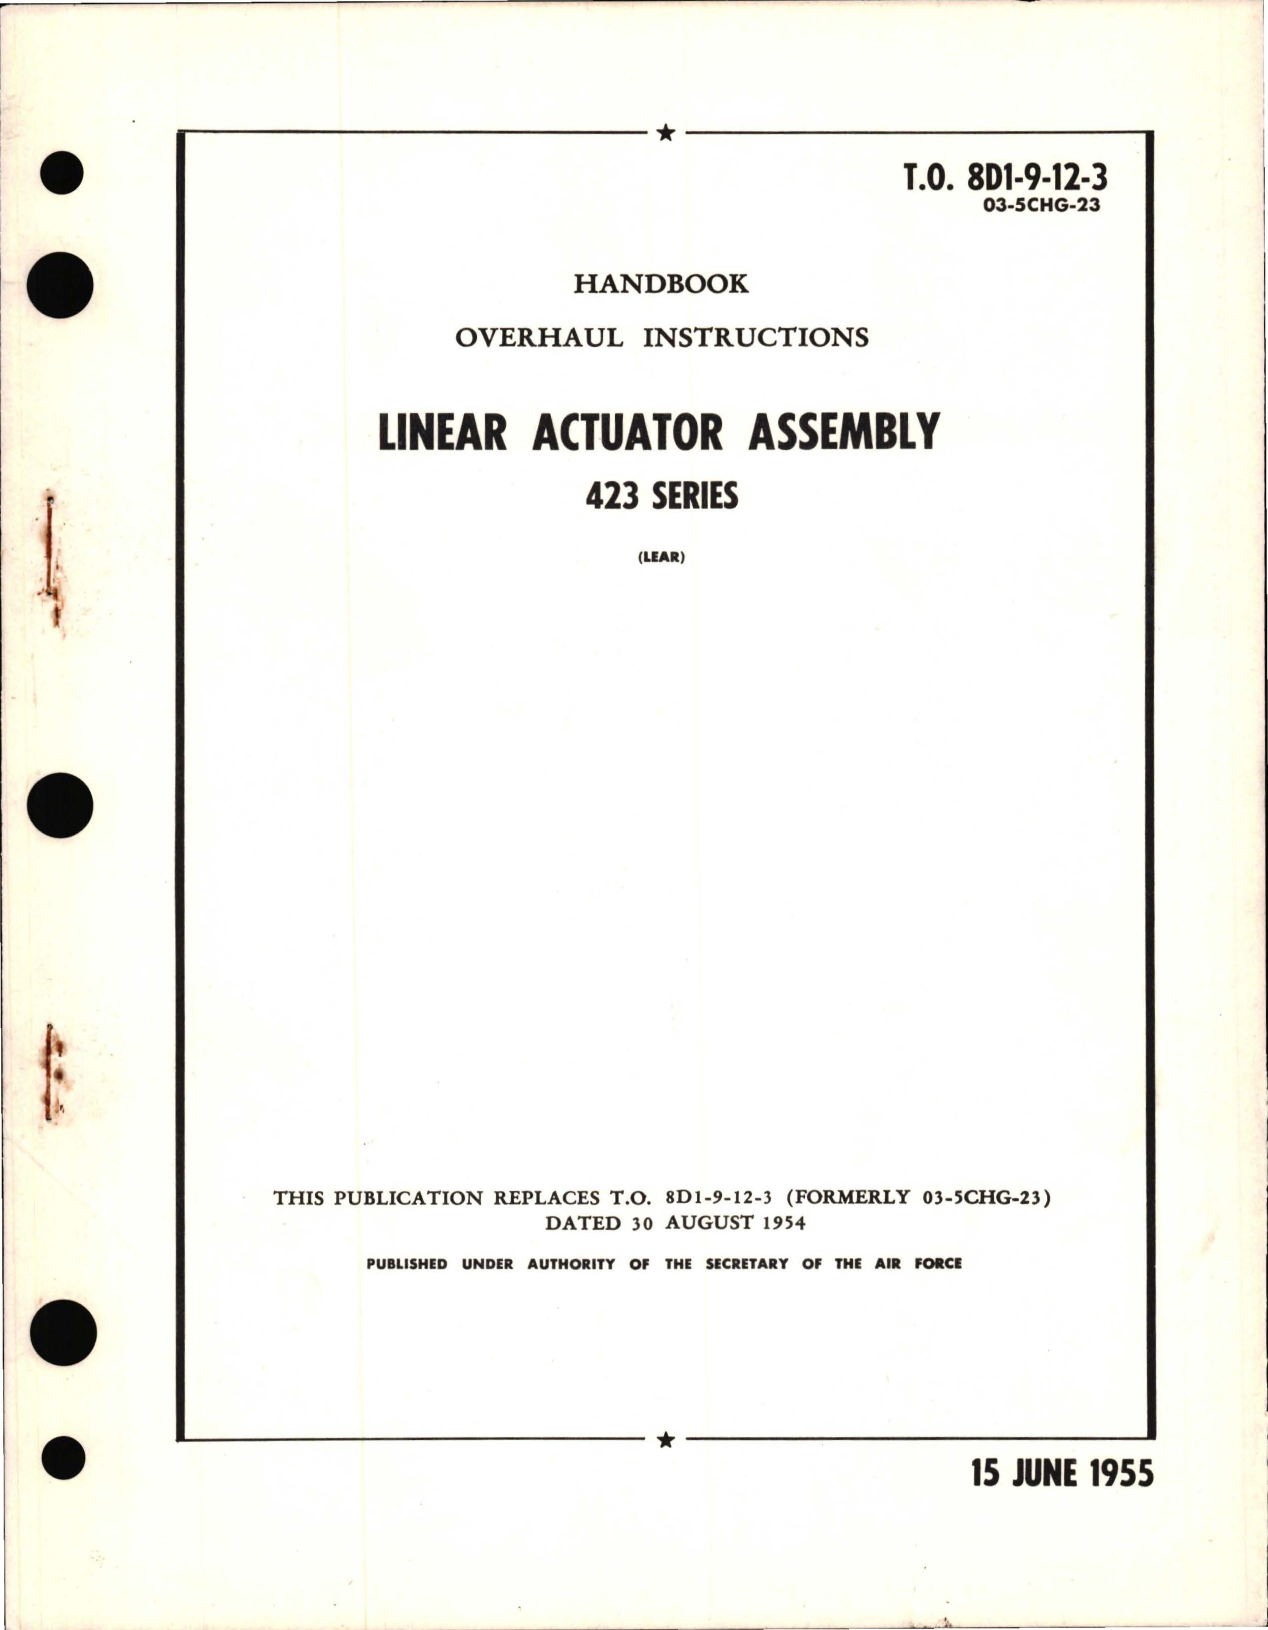 Sample page 1 from AirCorps Library document: Overhaul Instructions for Linear Actuator Assembly 423 Series